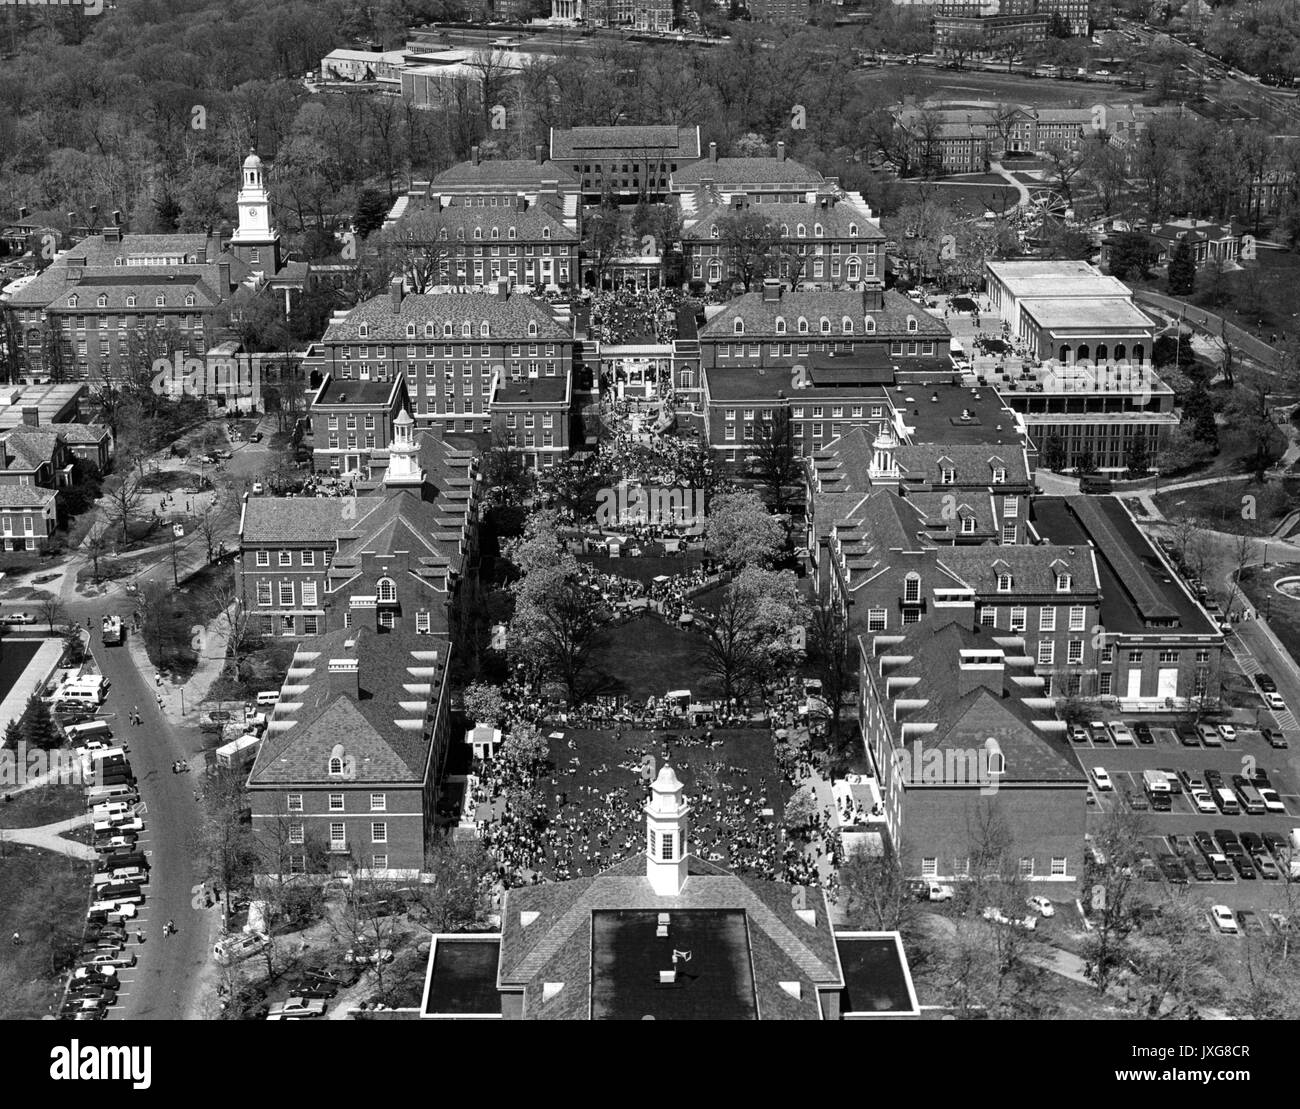 Aerial Views, Homewood Aerial shot of the Homewood campus, taken north from Shriver Hall, Some type of festival is ocurring on campus, as evidenced by a ferris wheel in the background, 1970. Stock Photo